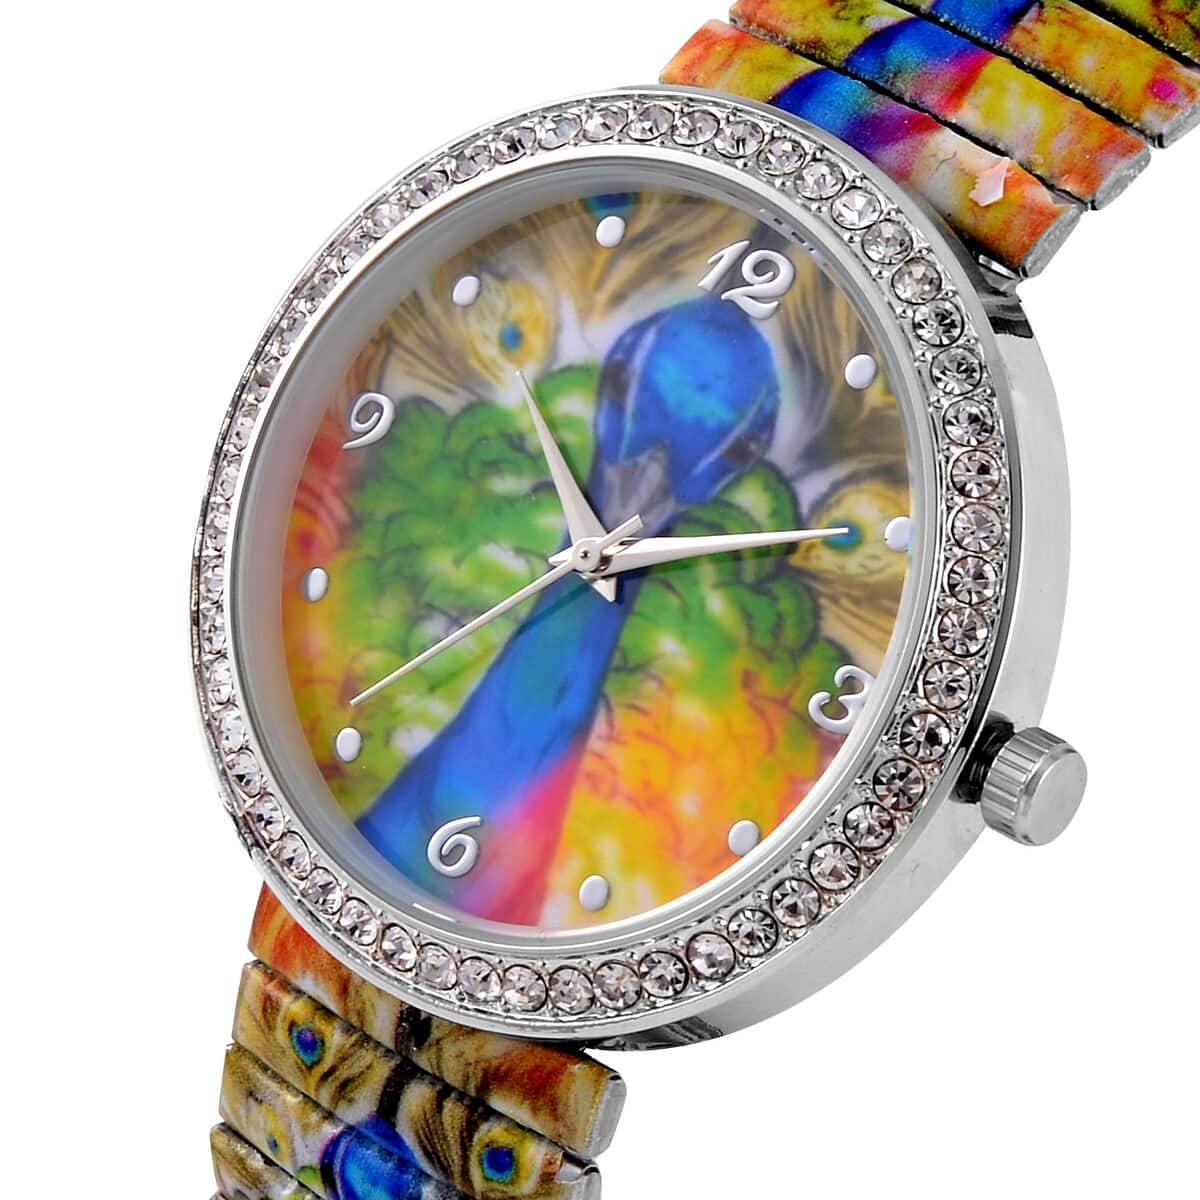 Strada Japanese Movement Bracelet Watch in Stainless Steel, Stretchable Watch with Austrian Crystals and Peacock Pattern (42.40mm) (6.50-7.0 Inches) image number 3